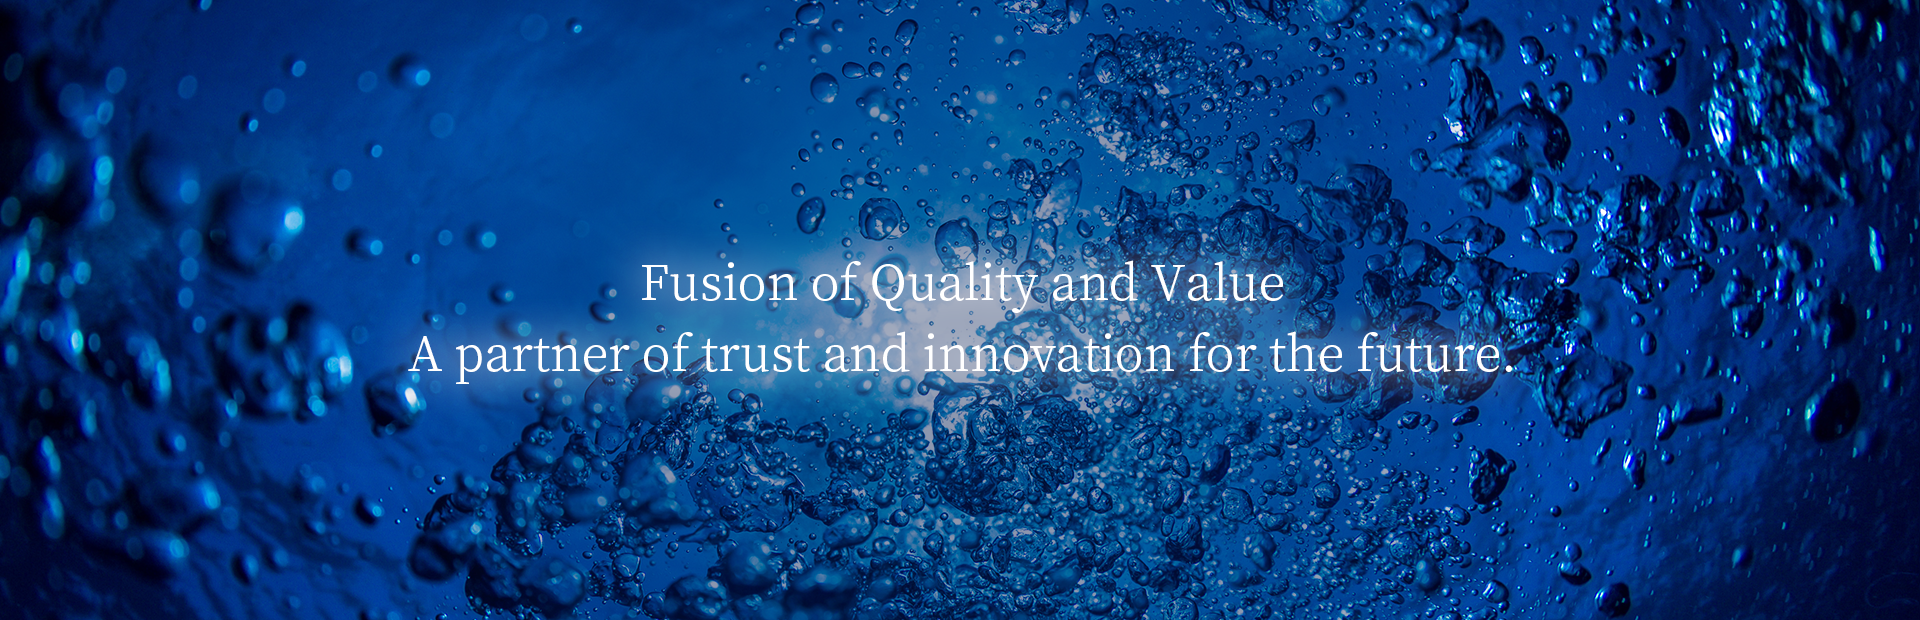 Fusion of Quality and Value.A partner of trust and innovation for the future